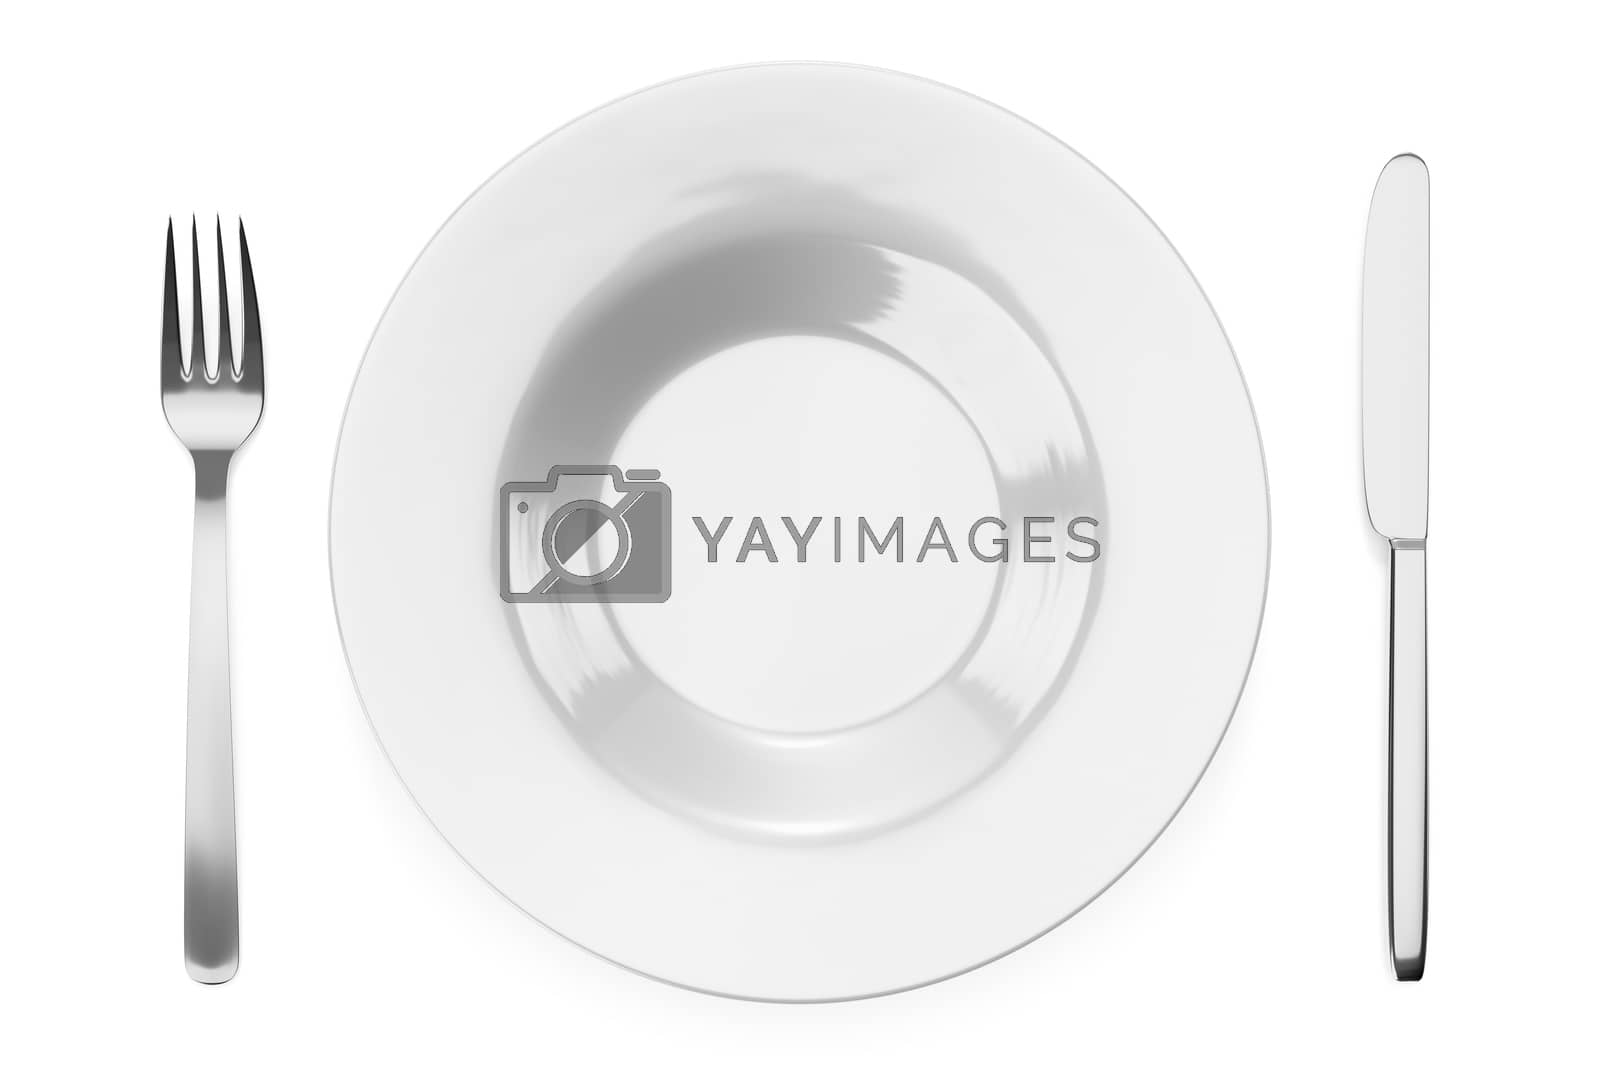 Royalty free image of some typical style dishware by magann